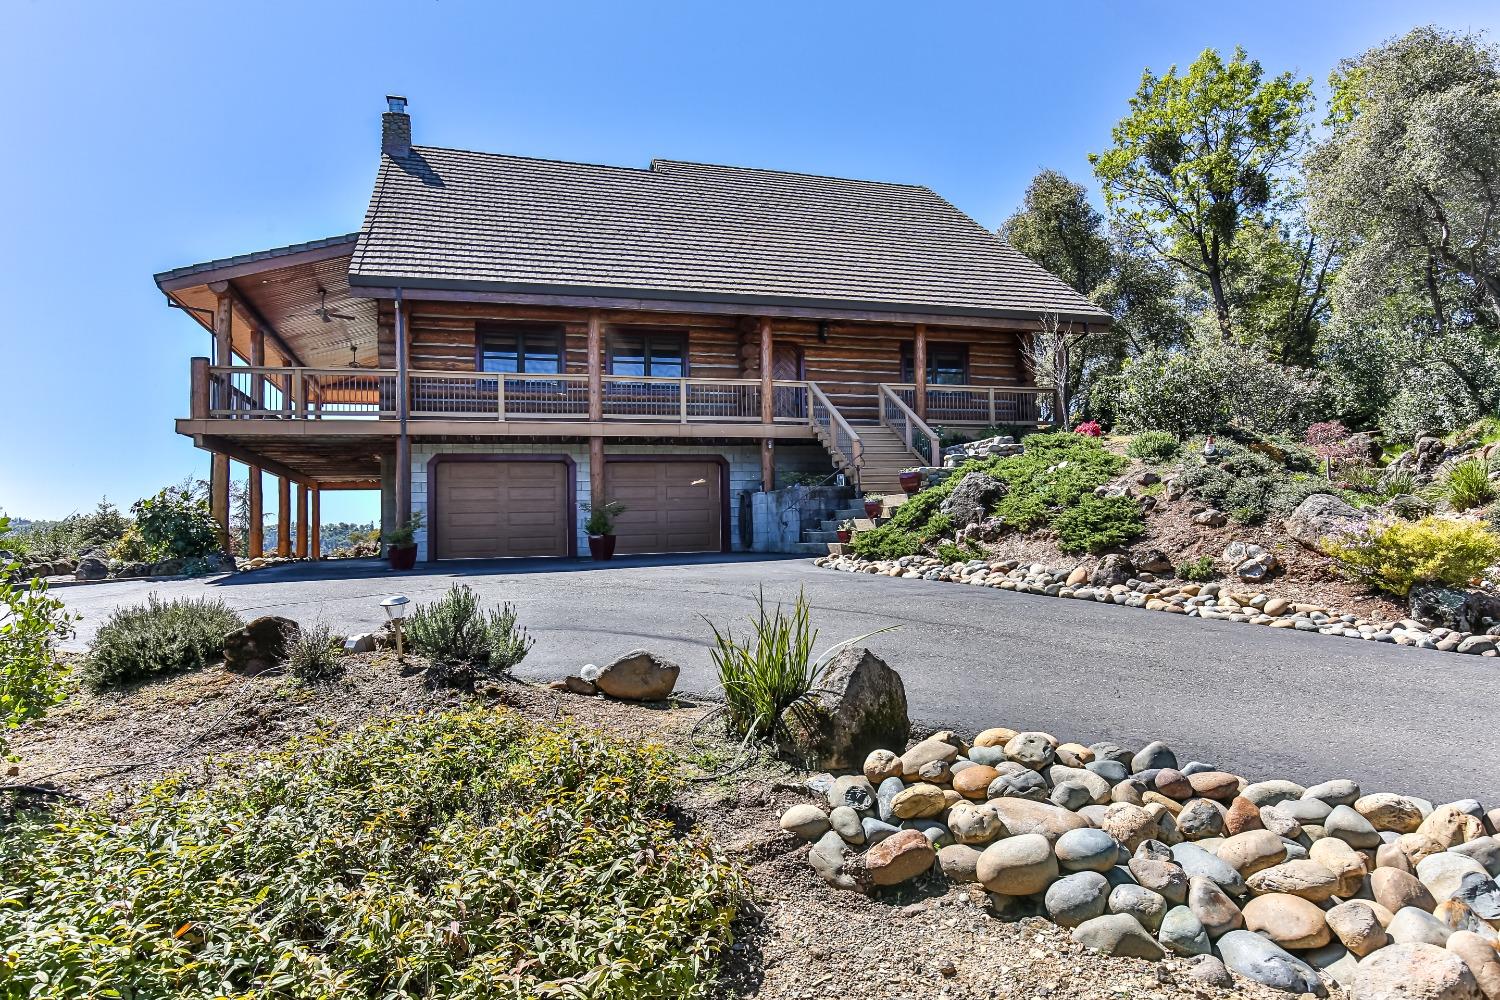 Photo of 985 Roddan Ct in Placerville, CA